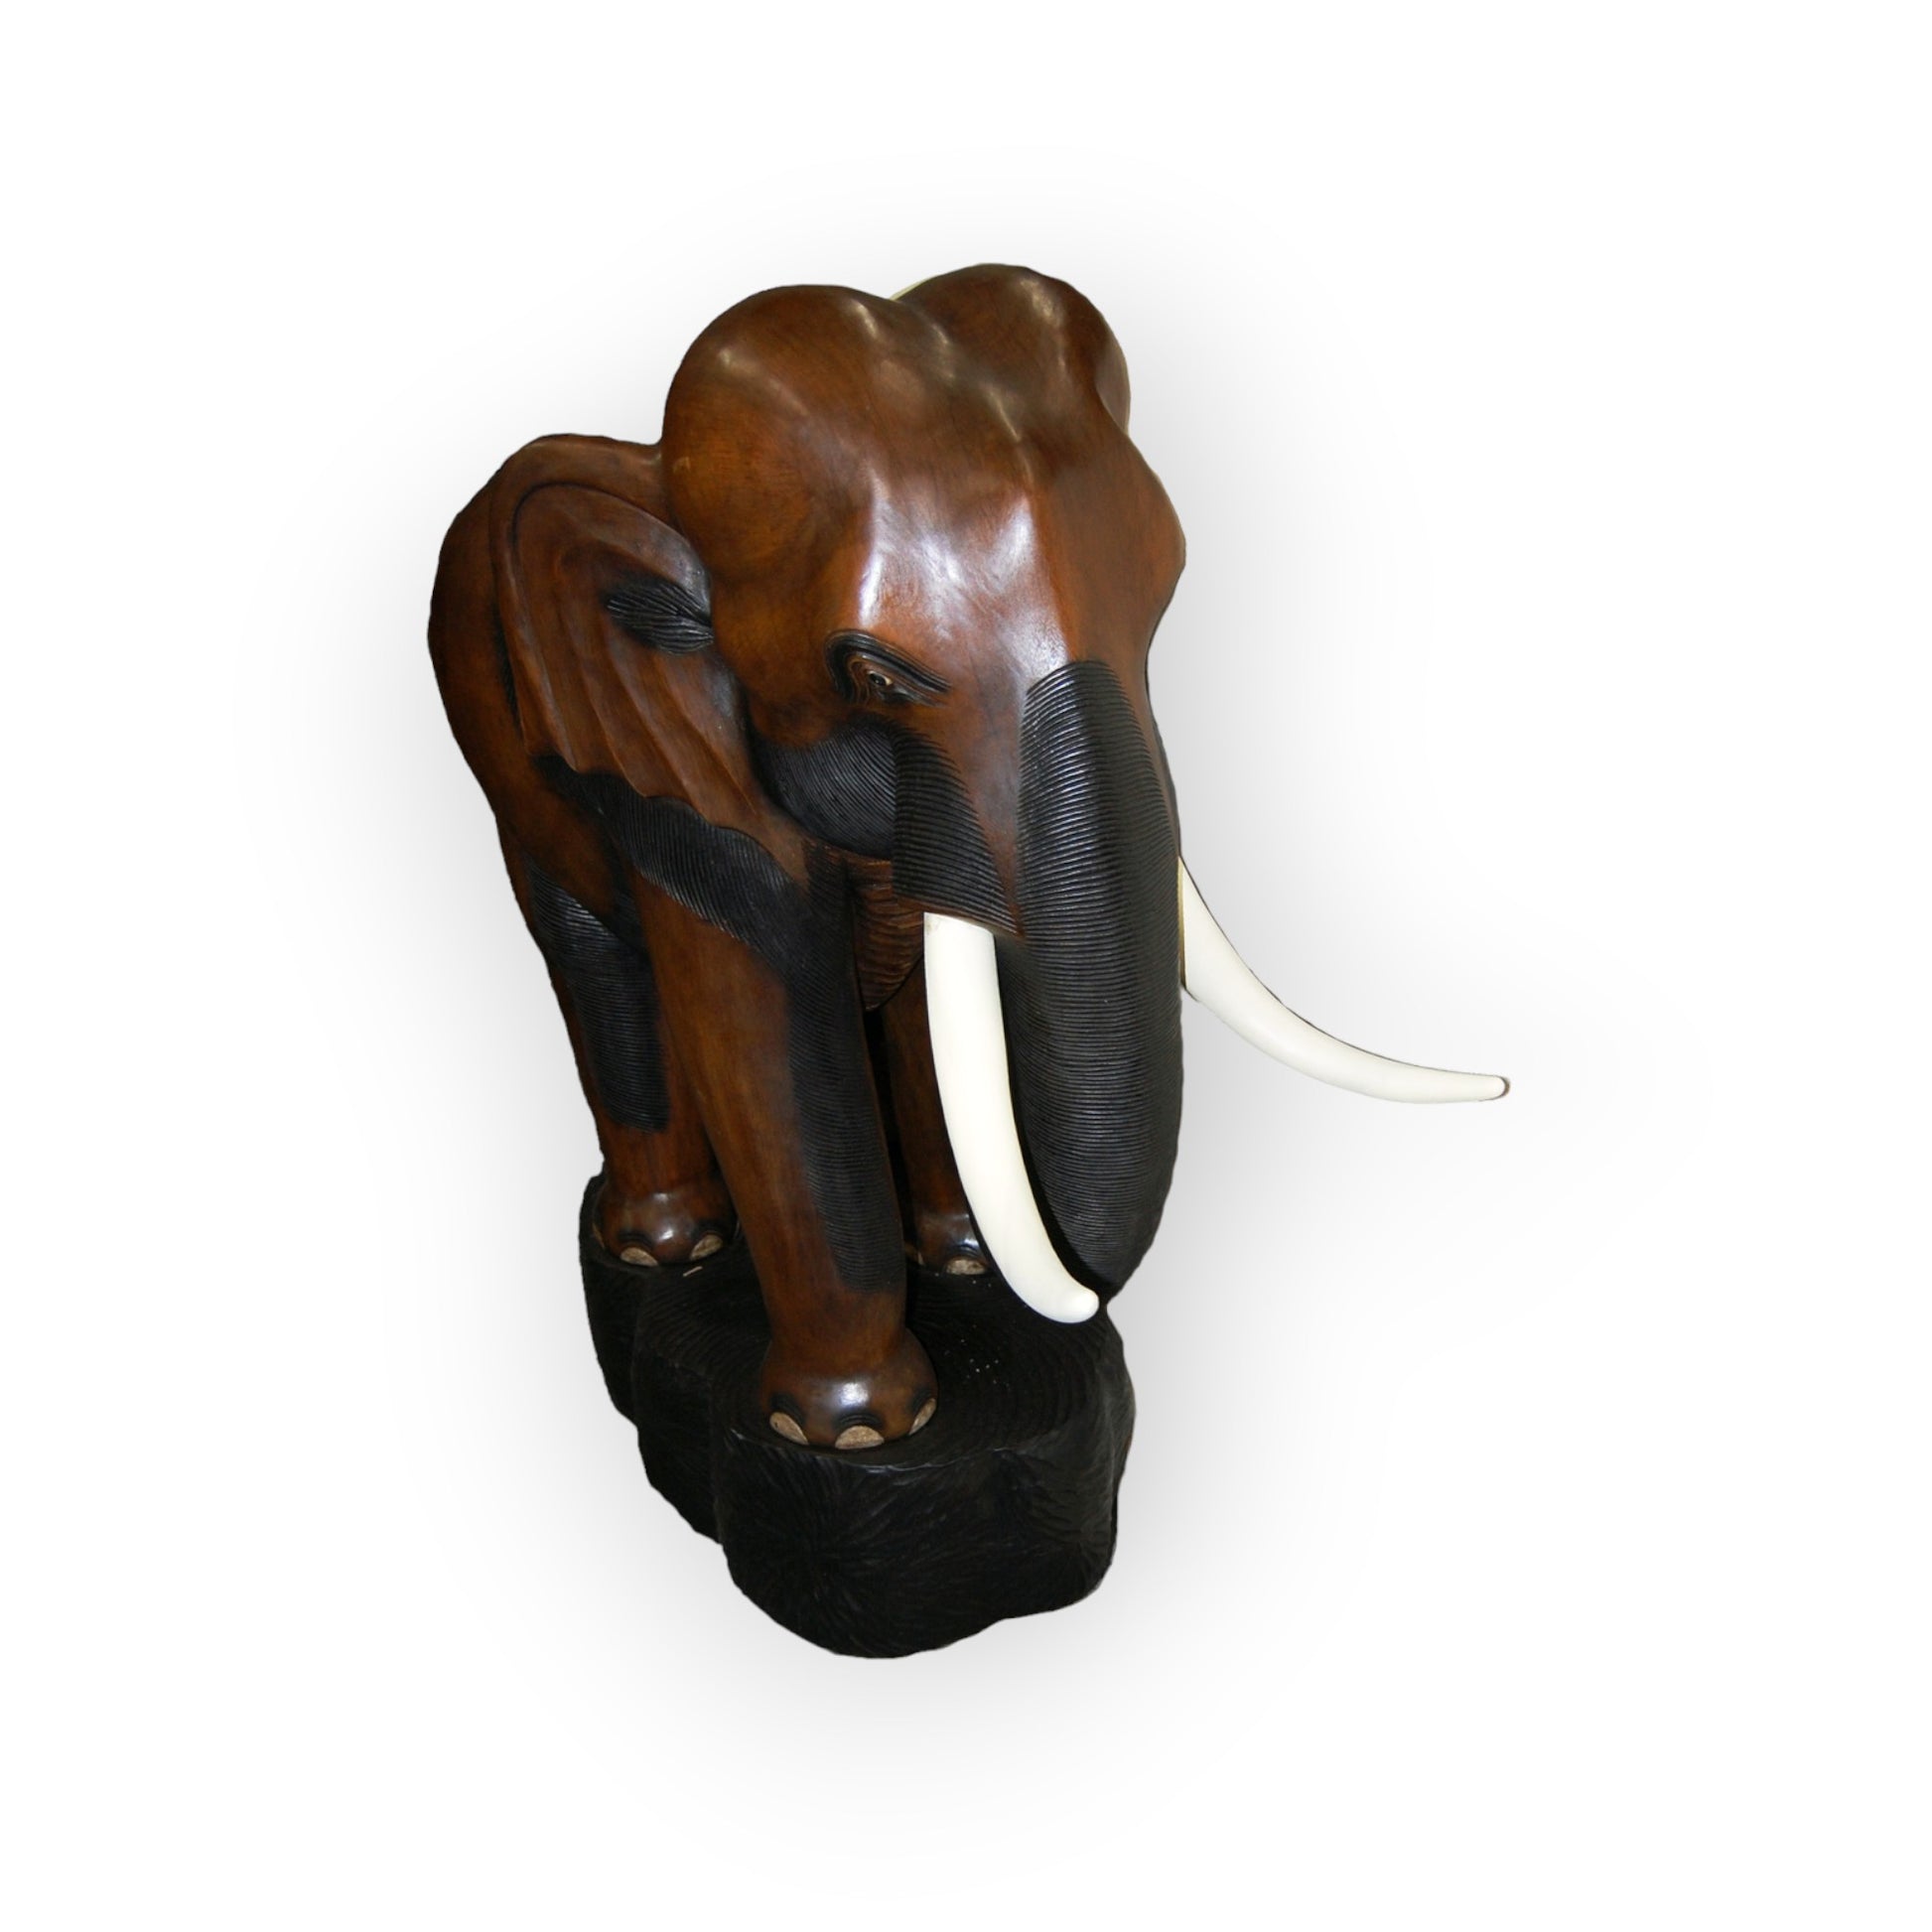 Large Wooden Elephant 52" Tall x 47 Long